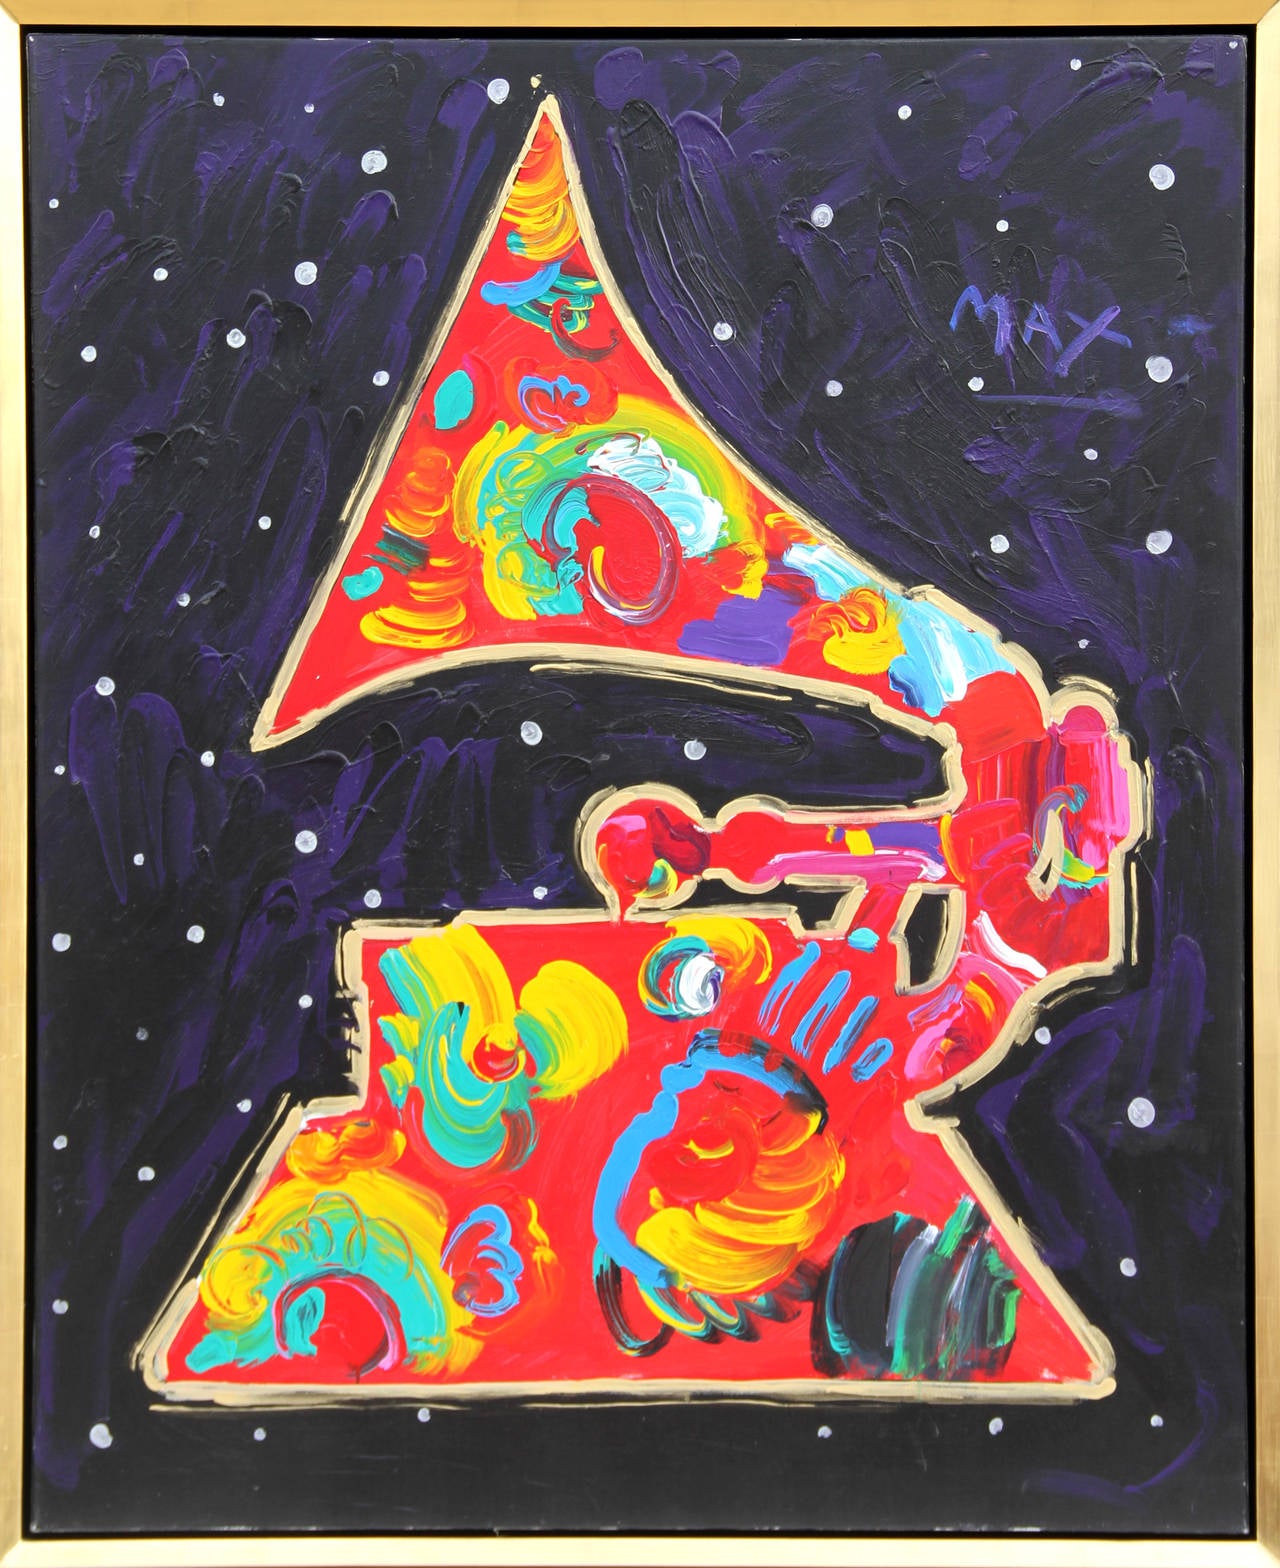 Grammy, Pop Art painting by Peter Max 1991